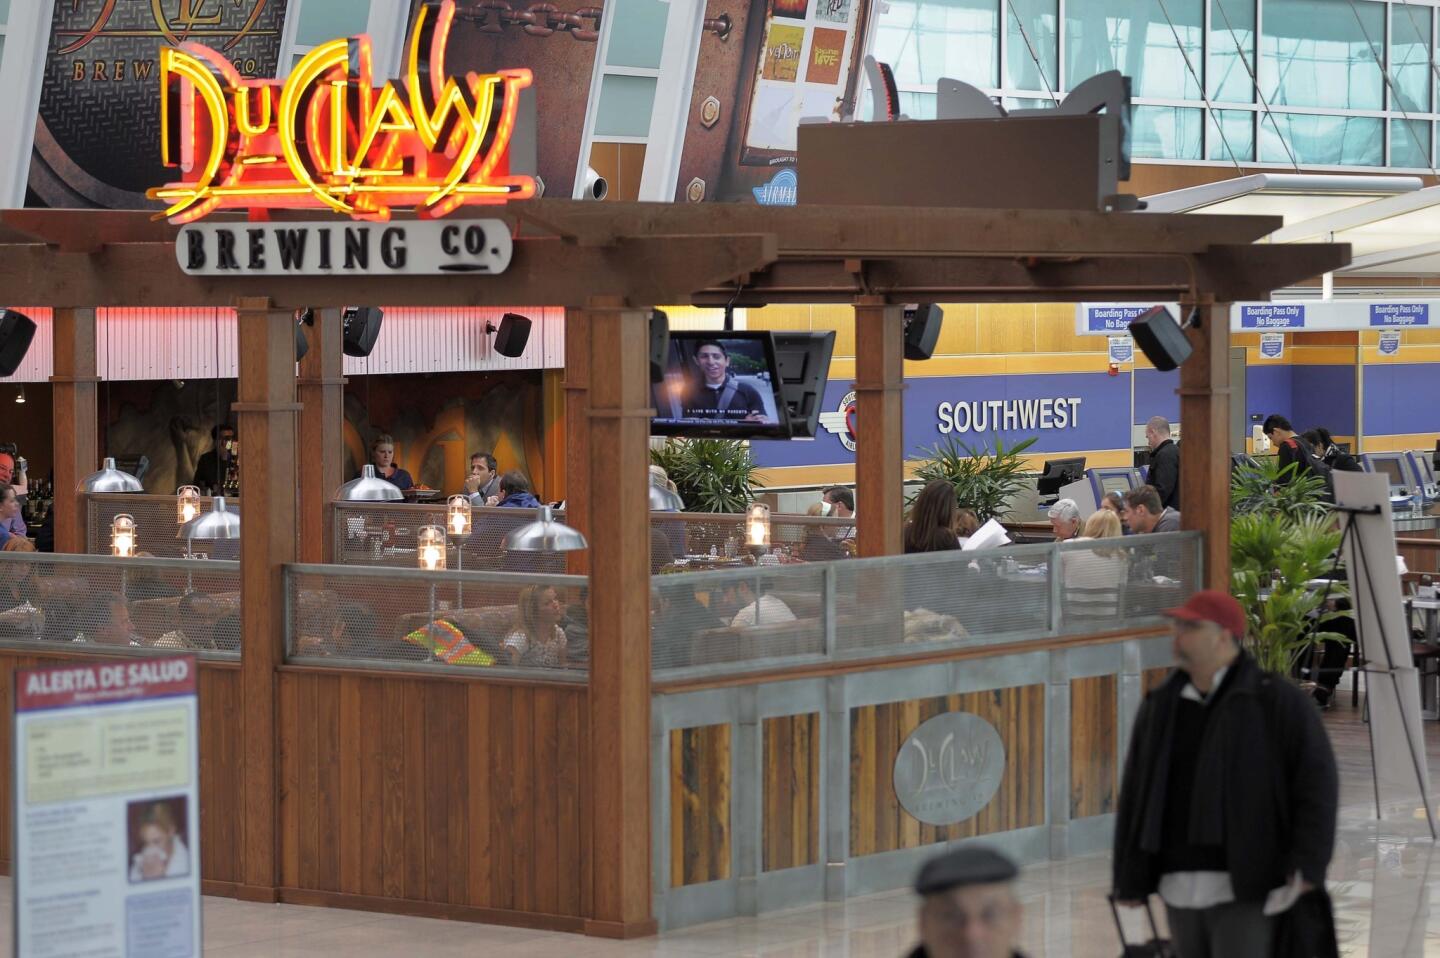 DuClaw Brewing Co. at BWI-Thurgood Marshall Airport